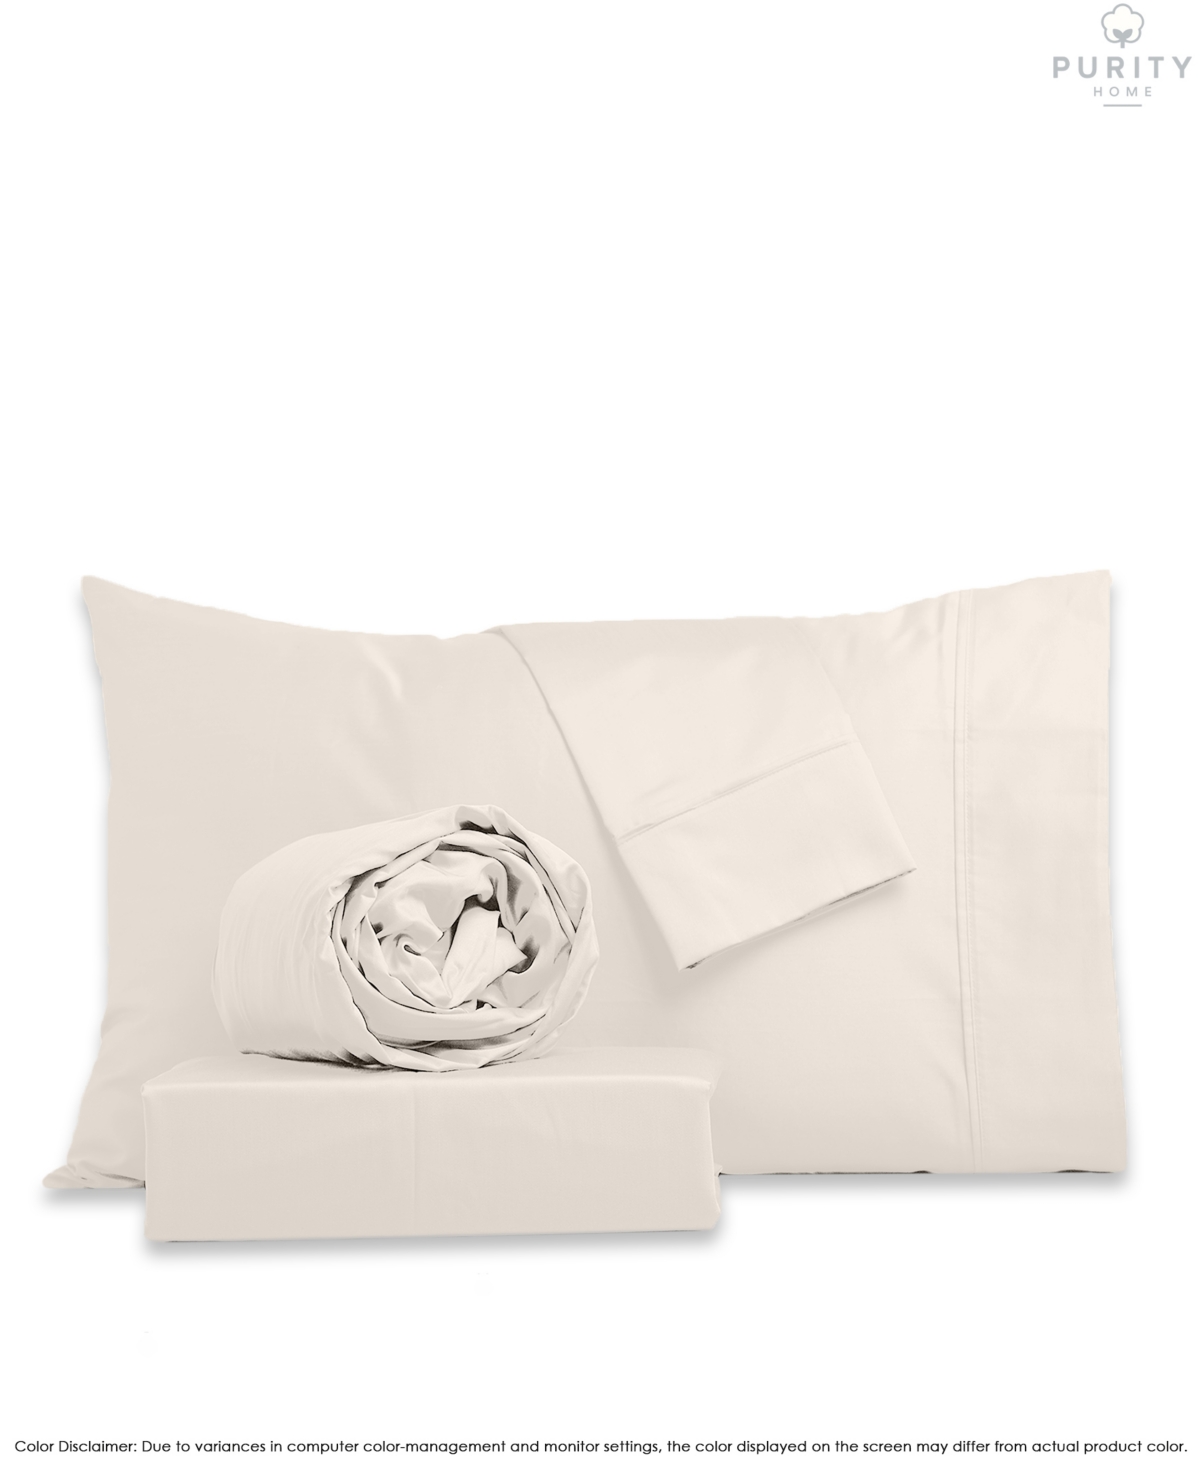 Purity Home 1000 Thread Count Egyptian Cotton Sheets Set, King Bedding